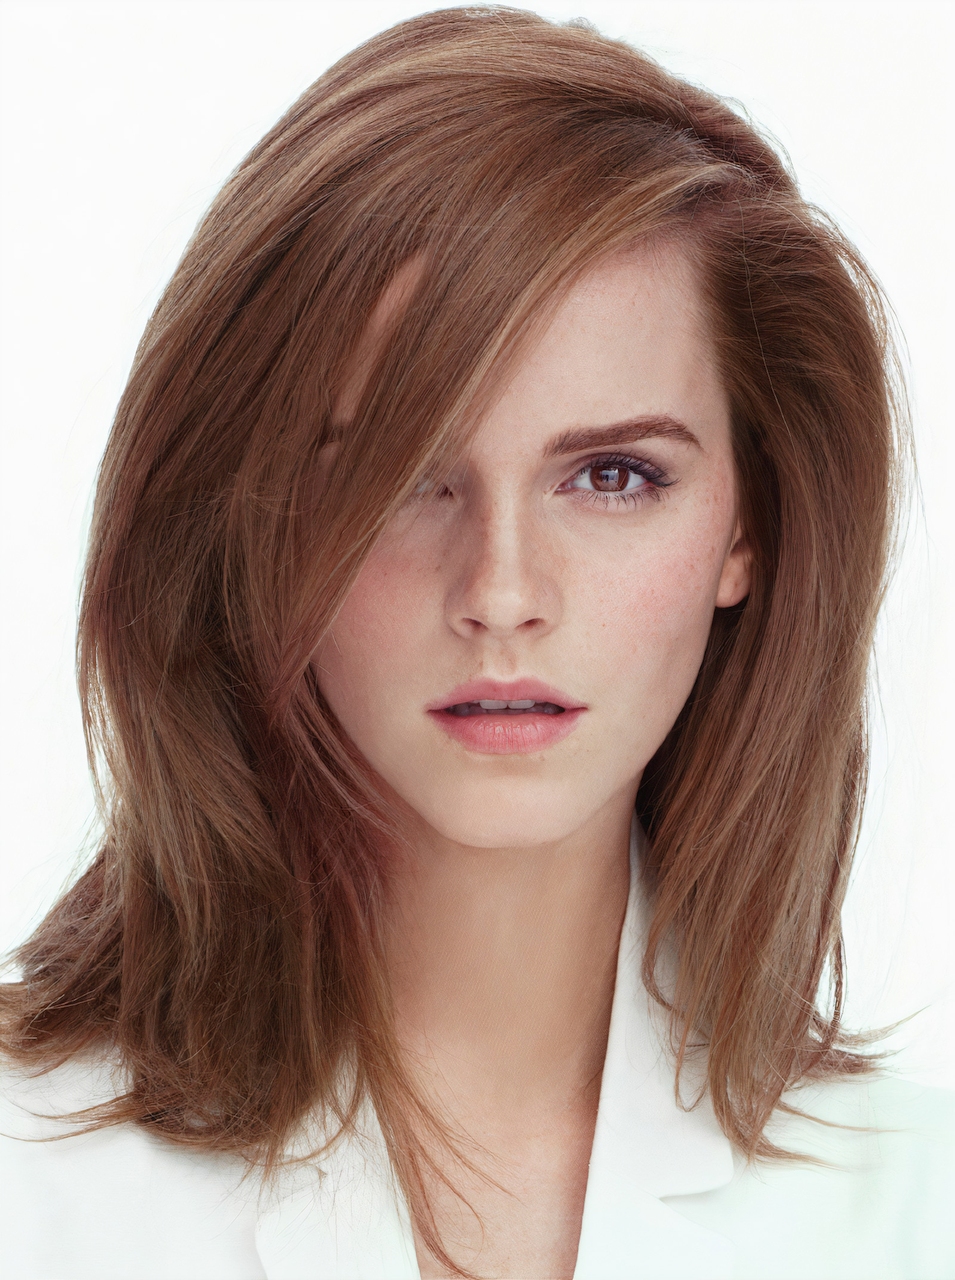 People 955x1280 Emma Watson women actress British brunette young women face simple background long hair hair covering eyes British women hair in face looking at viewer white background studio women indoors